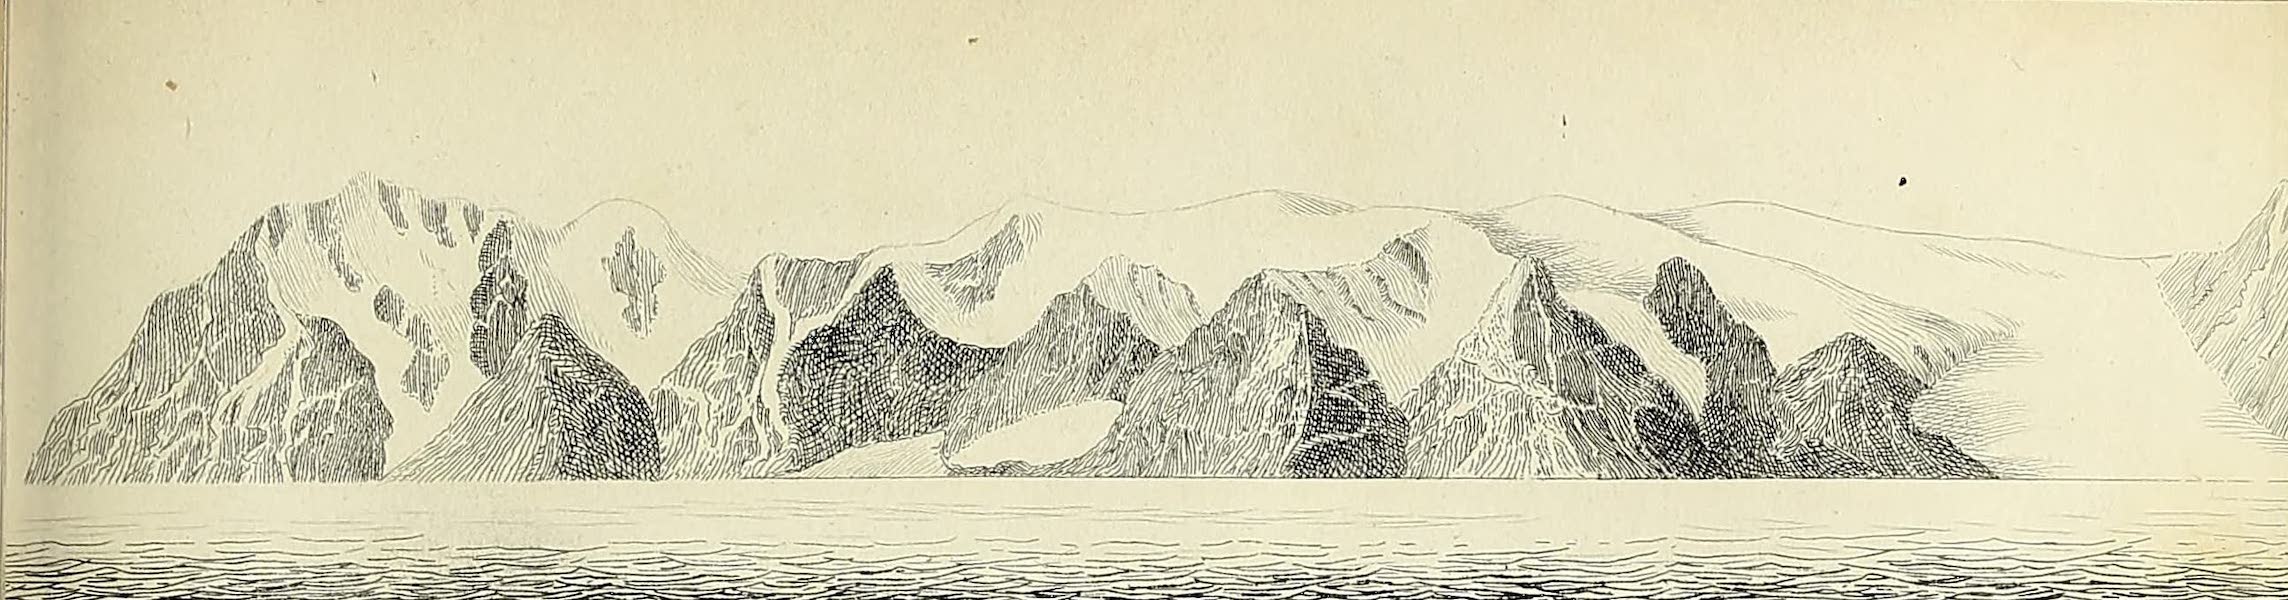 Journal of a Voyage for the Discovery of a North-West Passage - Cape Warrender, bearing N. 82 W. (1821)